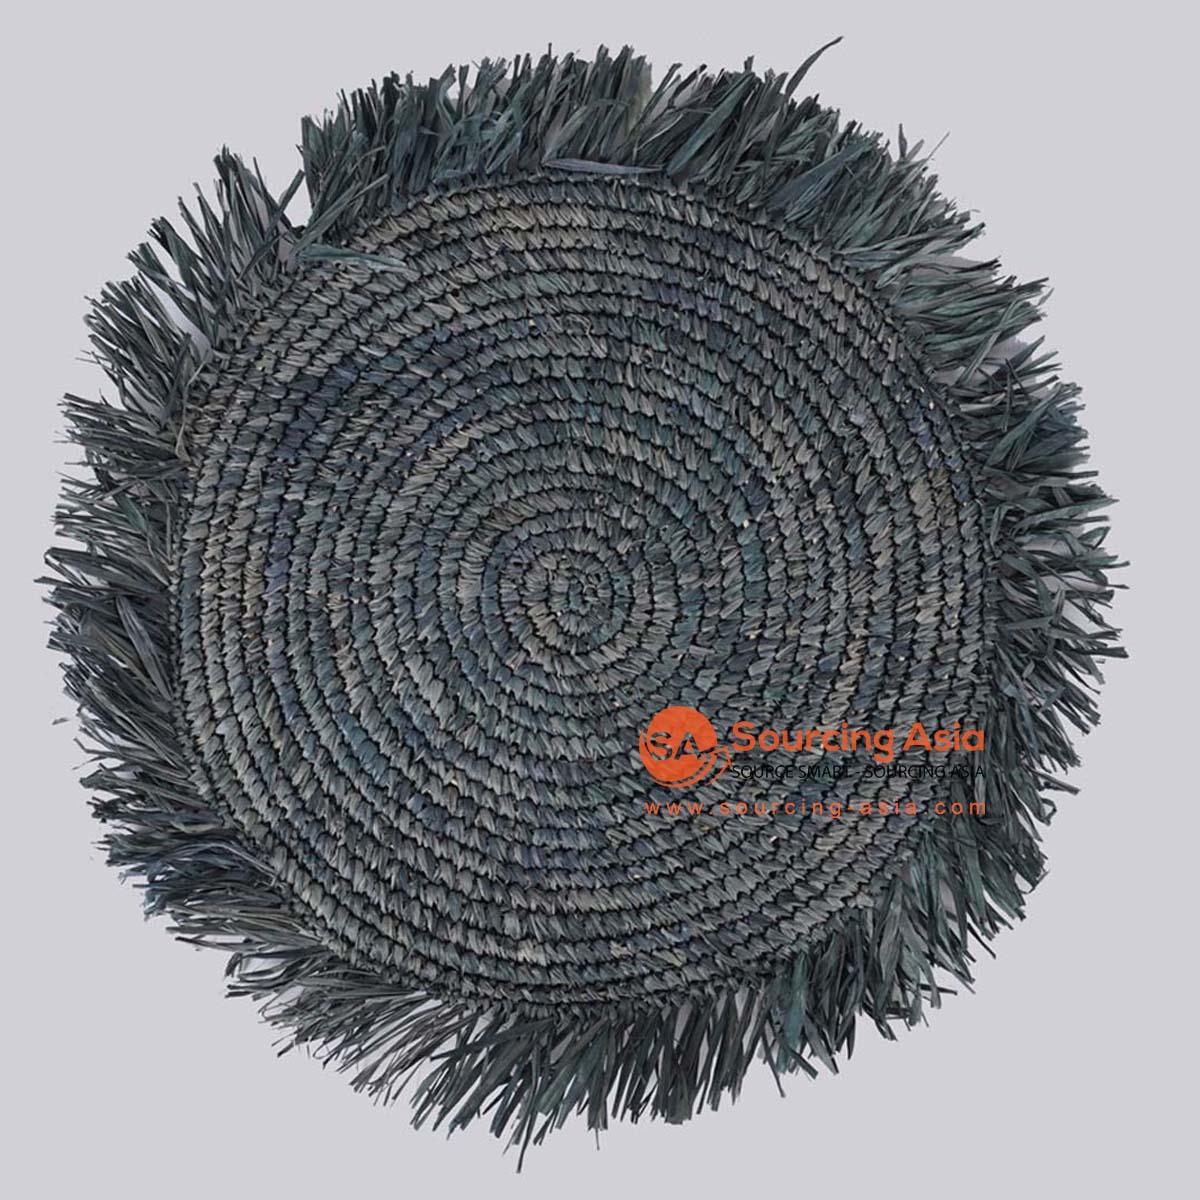 HBSC558-1 BLACK GAJIH ROUND PLACEMAT WITH FRINGE